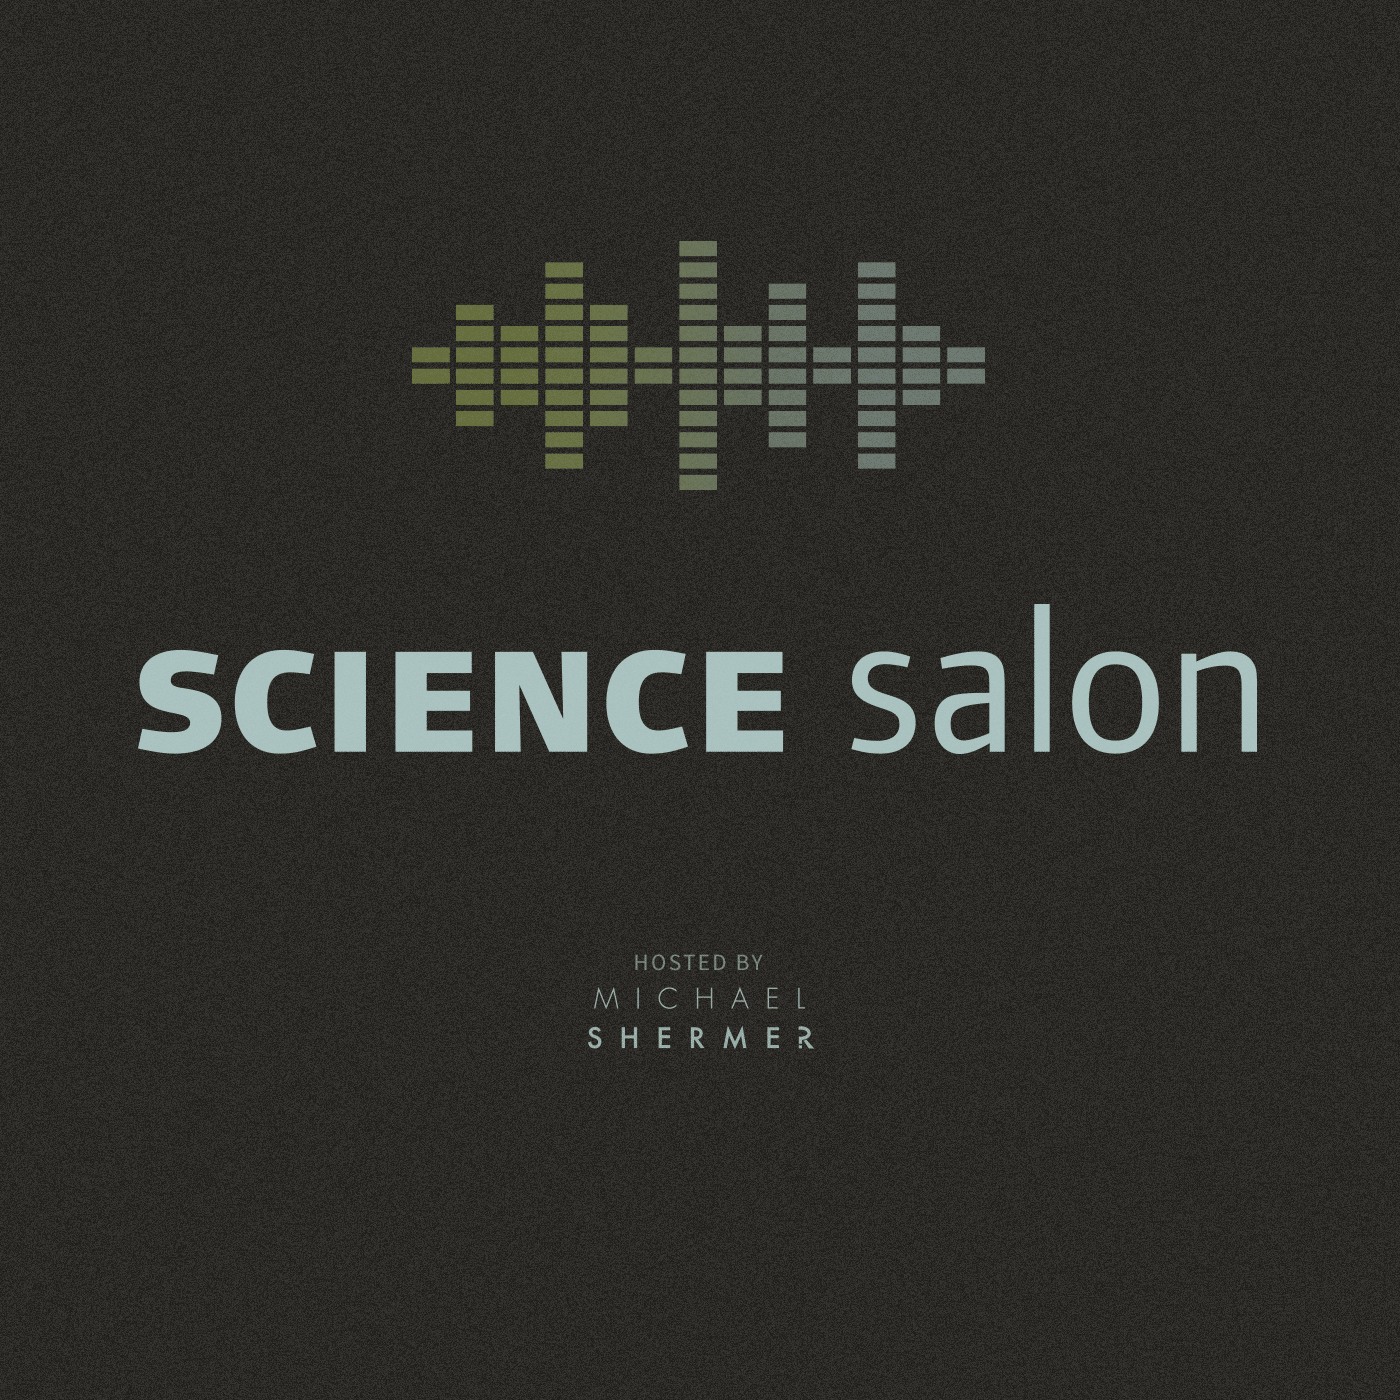 Get tickets to Science Salon